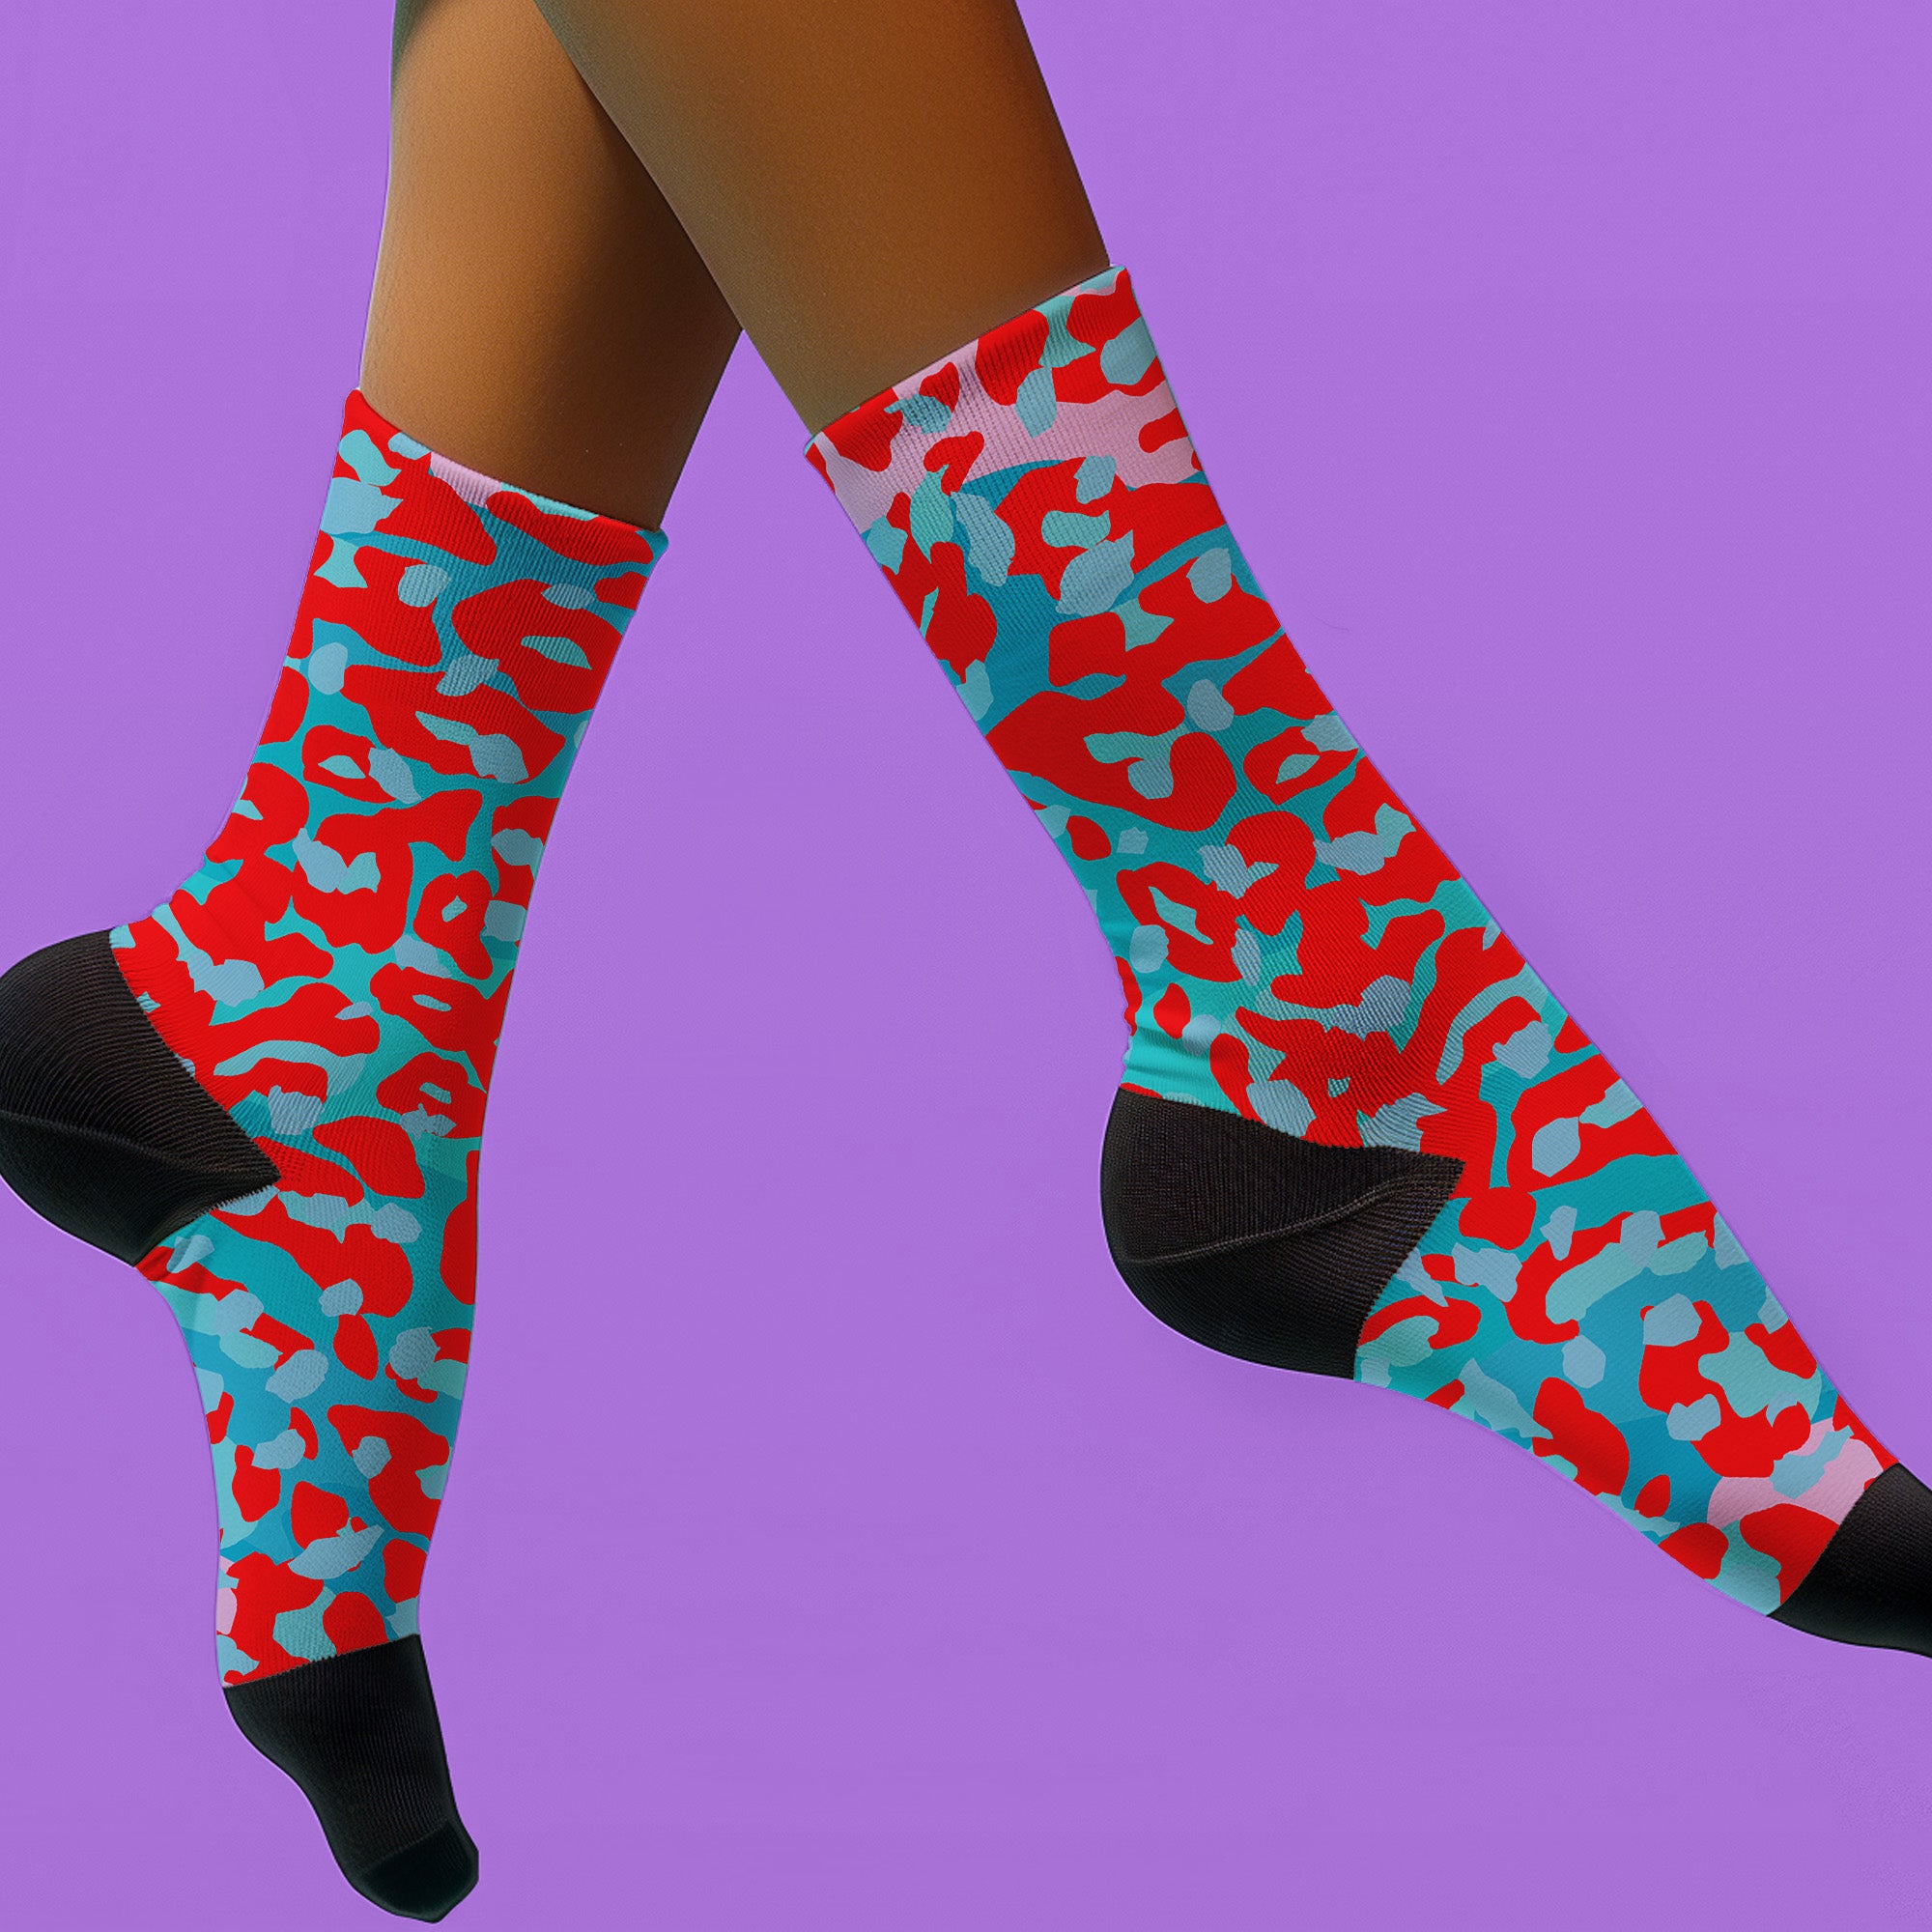 Dive into bold fashion with these vibrant socks featuring an eye-catching red, blue, and pink cheetah print pattern. Perfect for those who love to make a statement, these socks are ideal for brightening up any outfit and showcasing your unique style. Comfortable and stylish with black heels and toes, they are a must-have accessory for the fashion-forward.